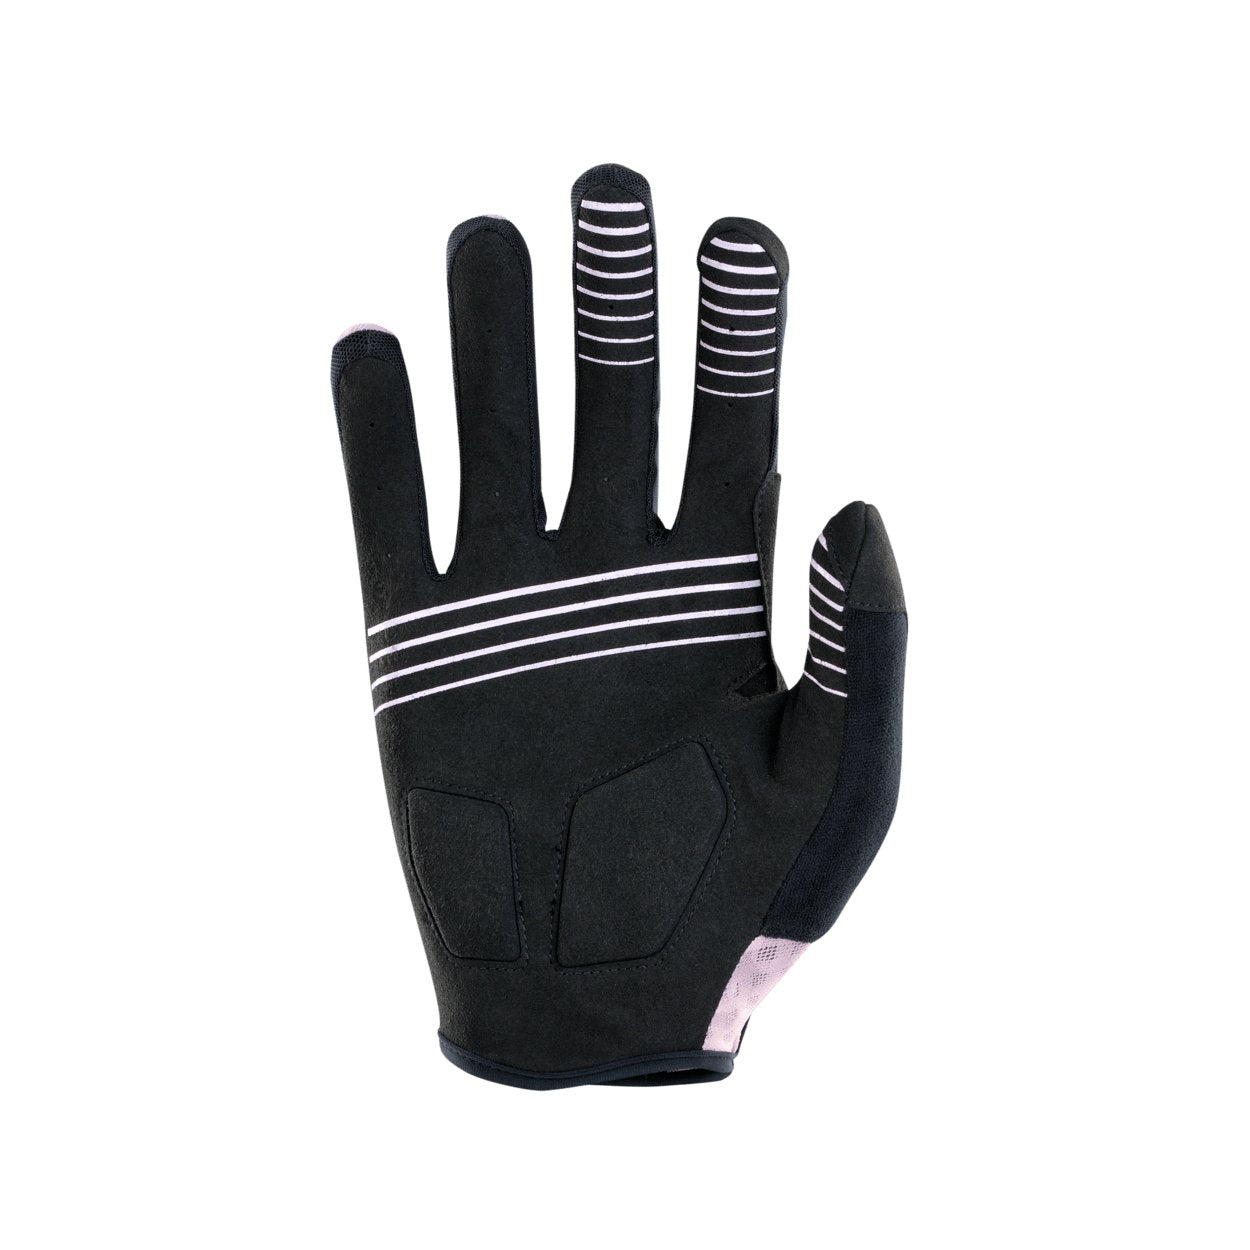 ION MTB Gloves Traze Long 2022 - Worthing Watersports - 9010583028026 - Gloves - ION Bike